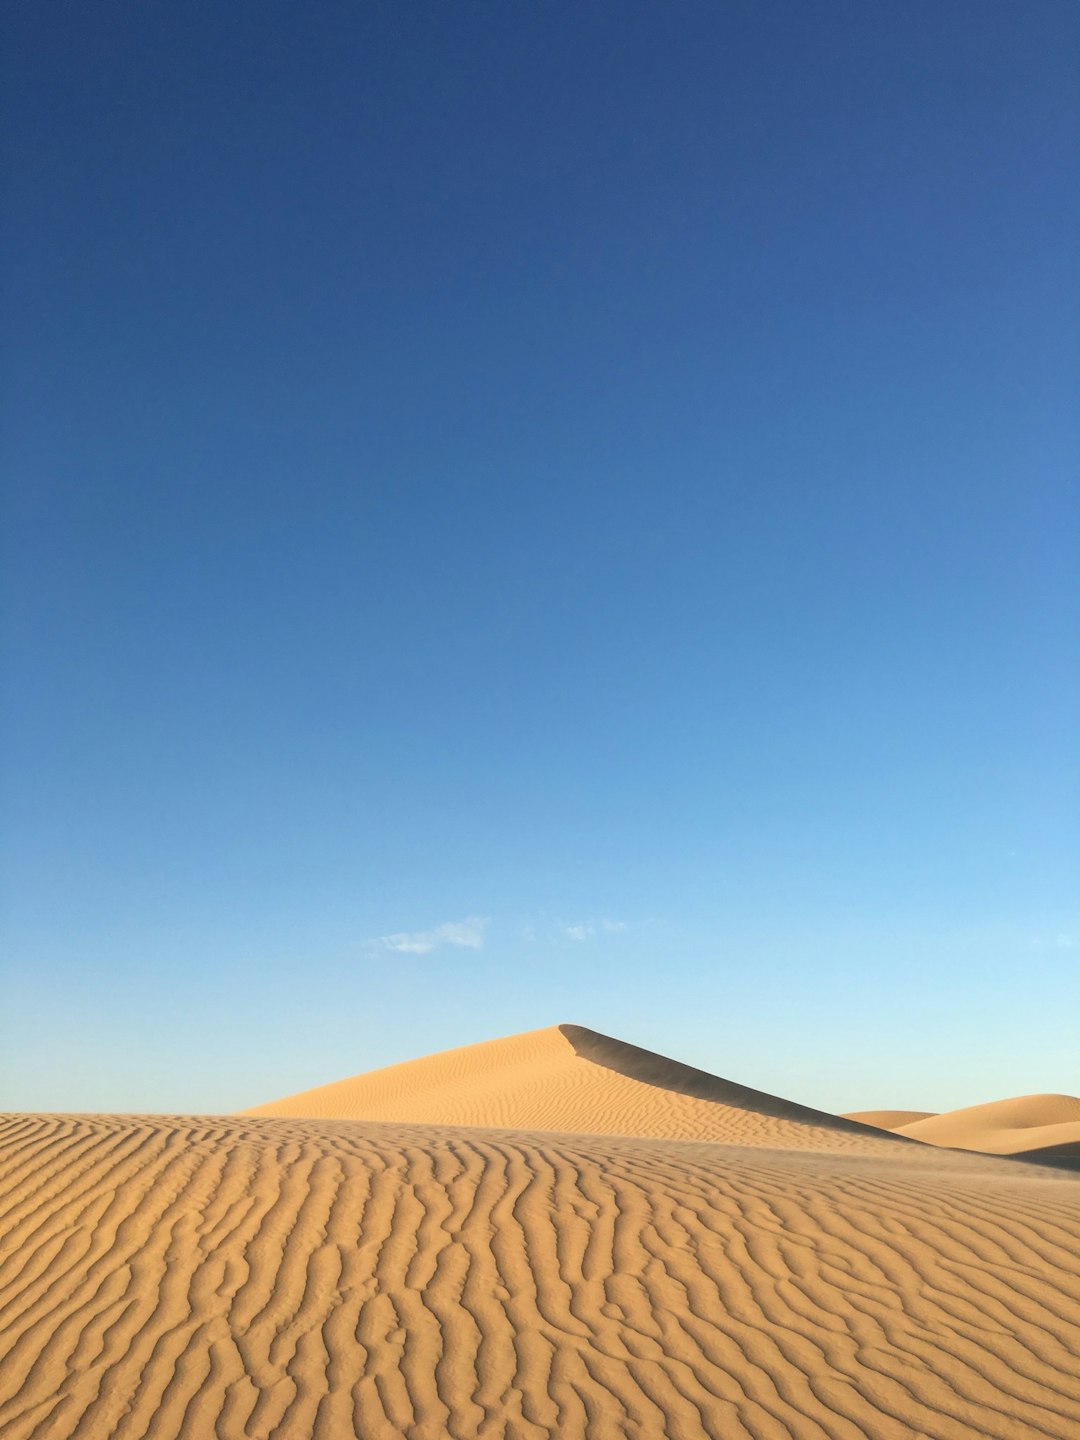 travelers stories about Desert in Glamis, United States